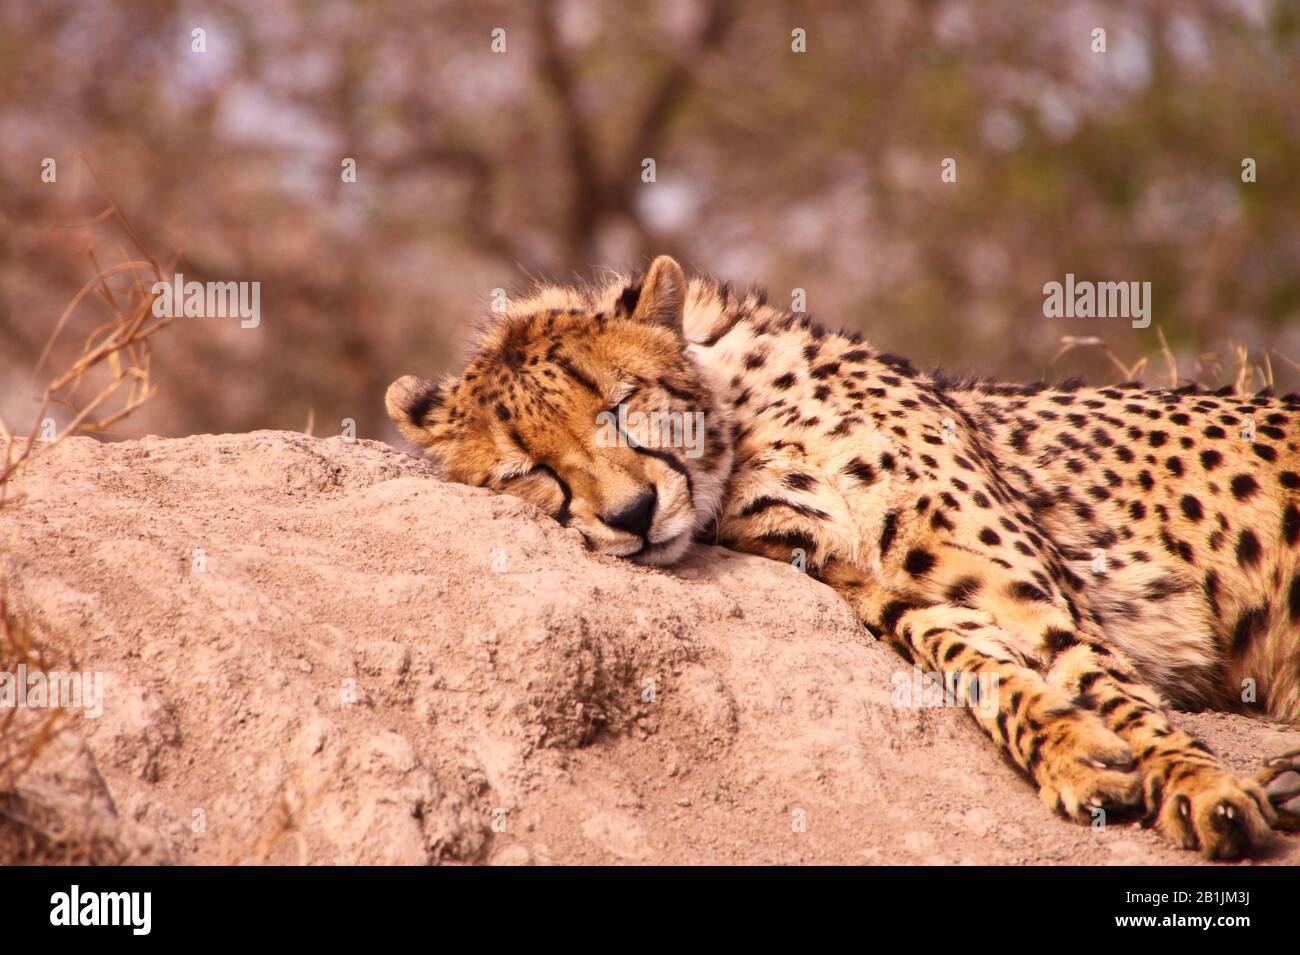 South Africa. A Cheetah lounging in the mid-day sun. Stock Photo